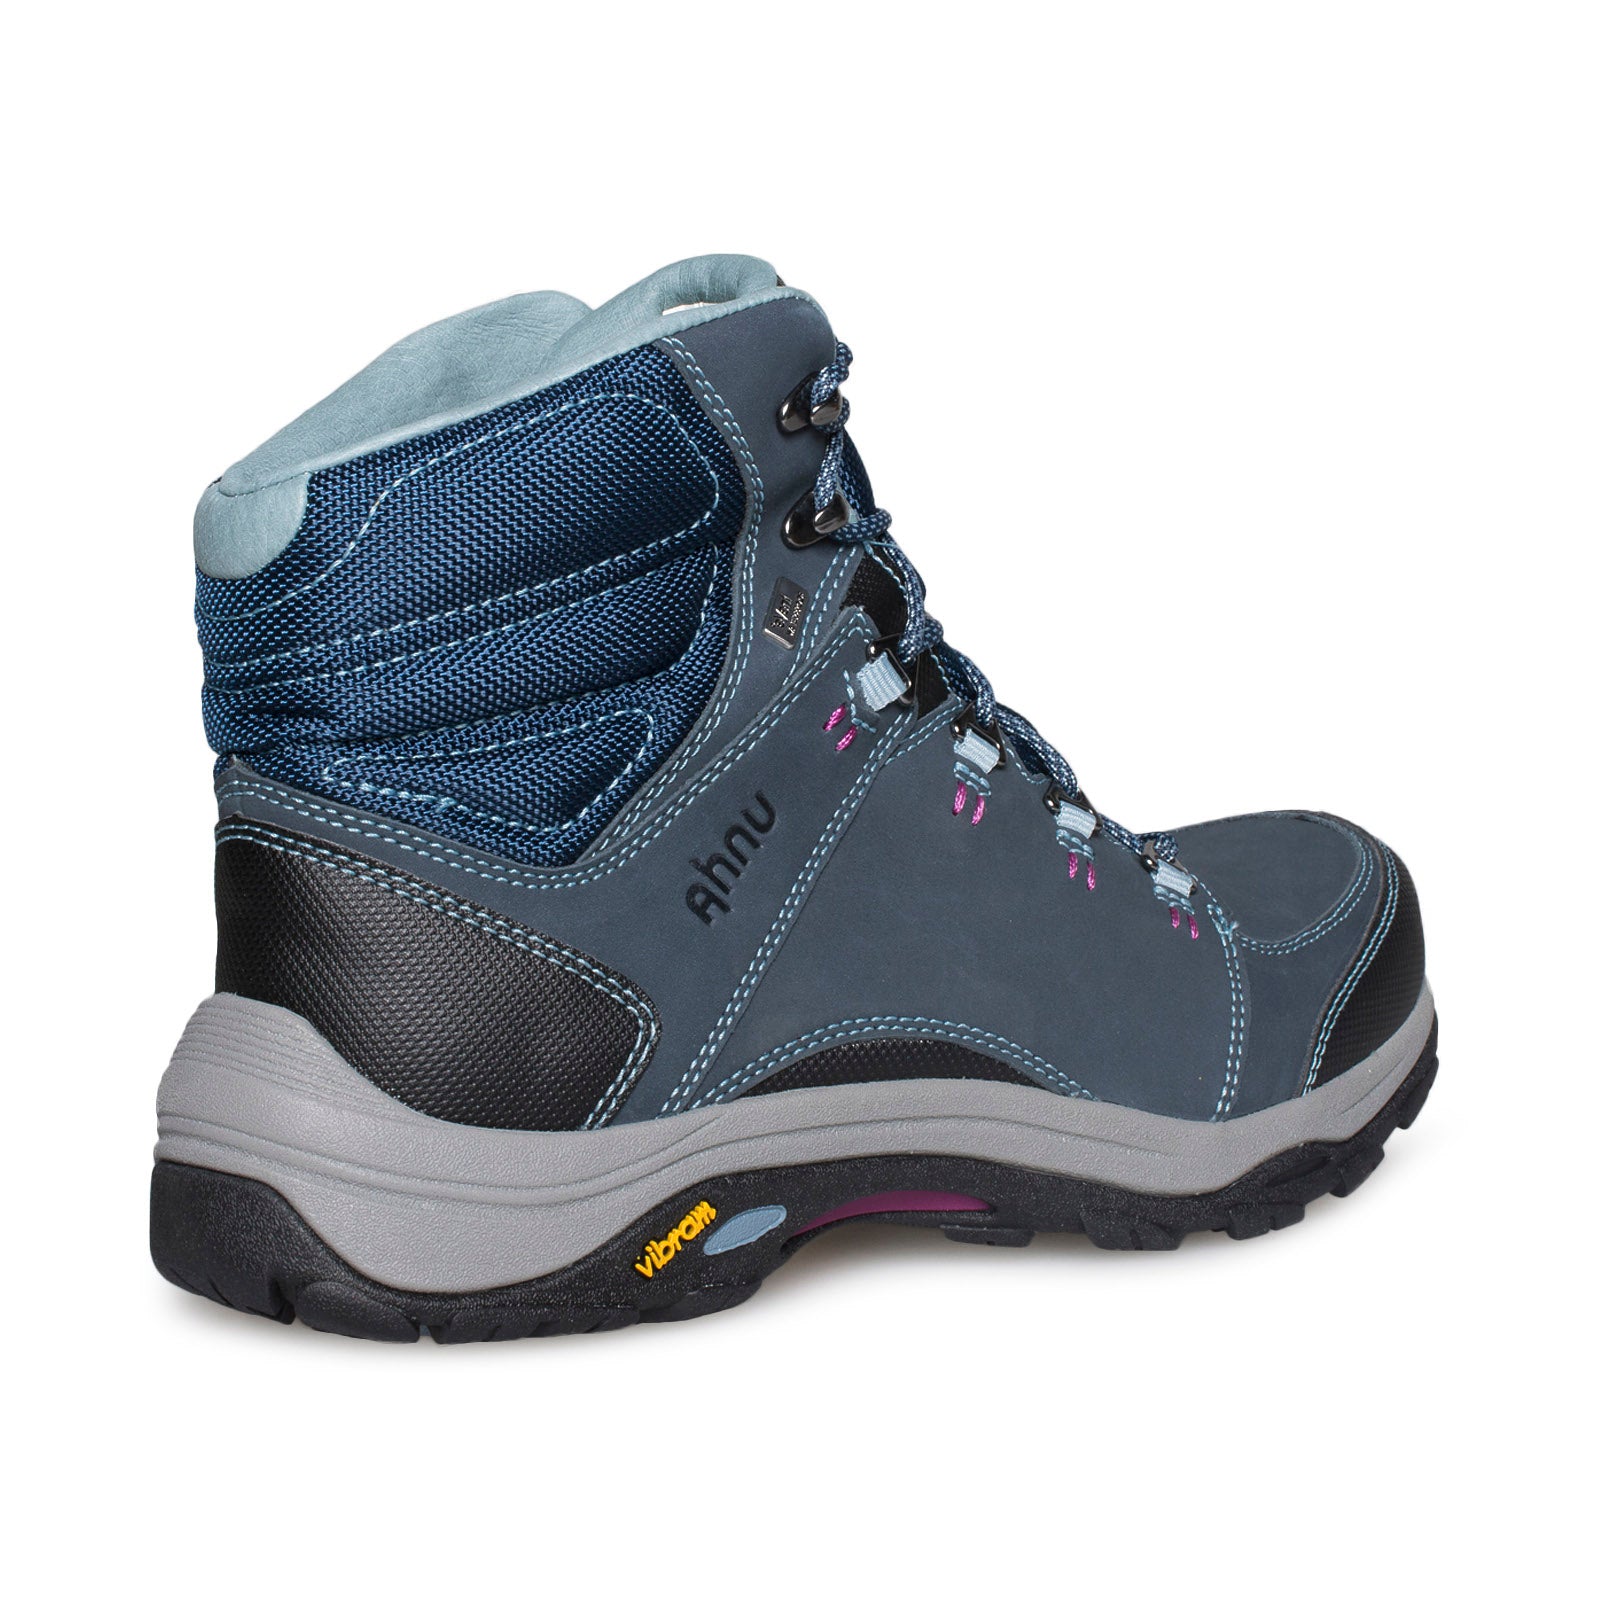 Women S Hiking Boots Mycozyboots